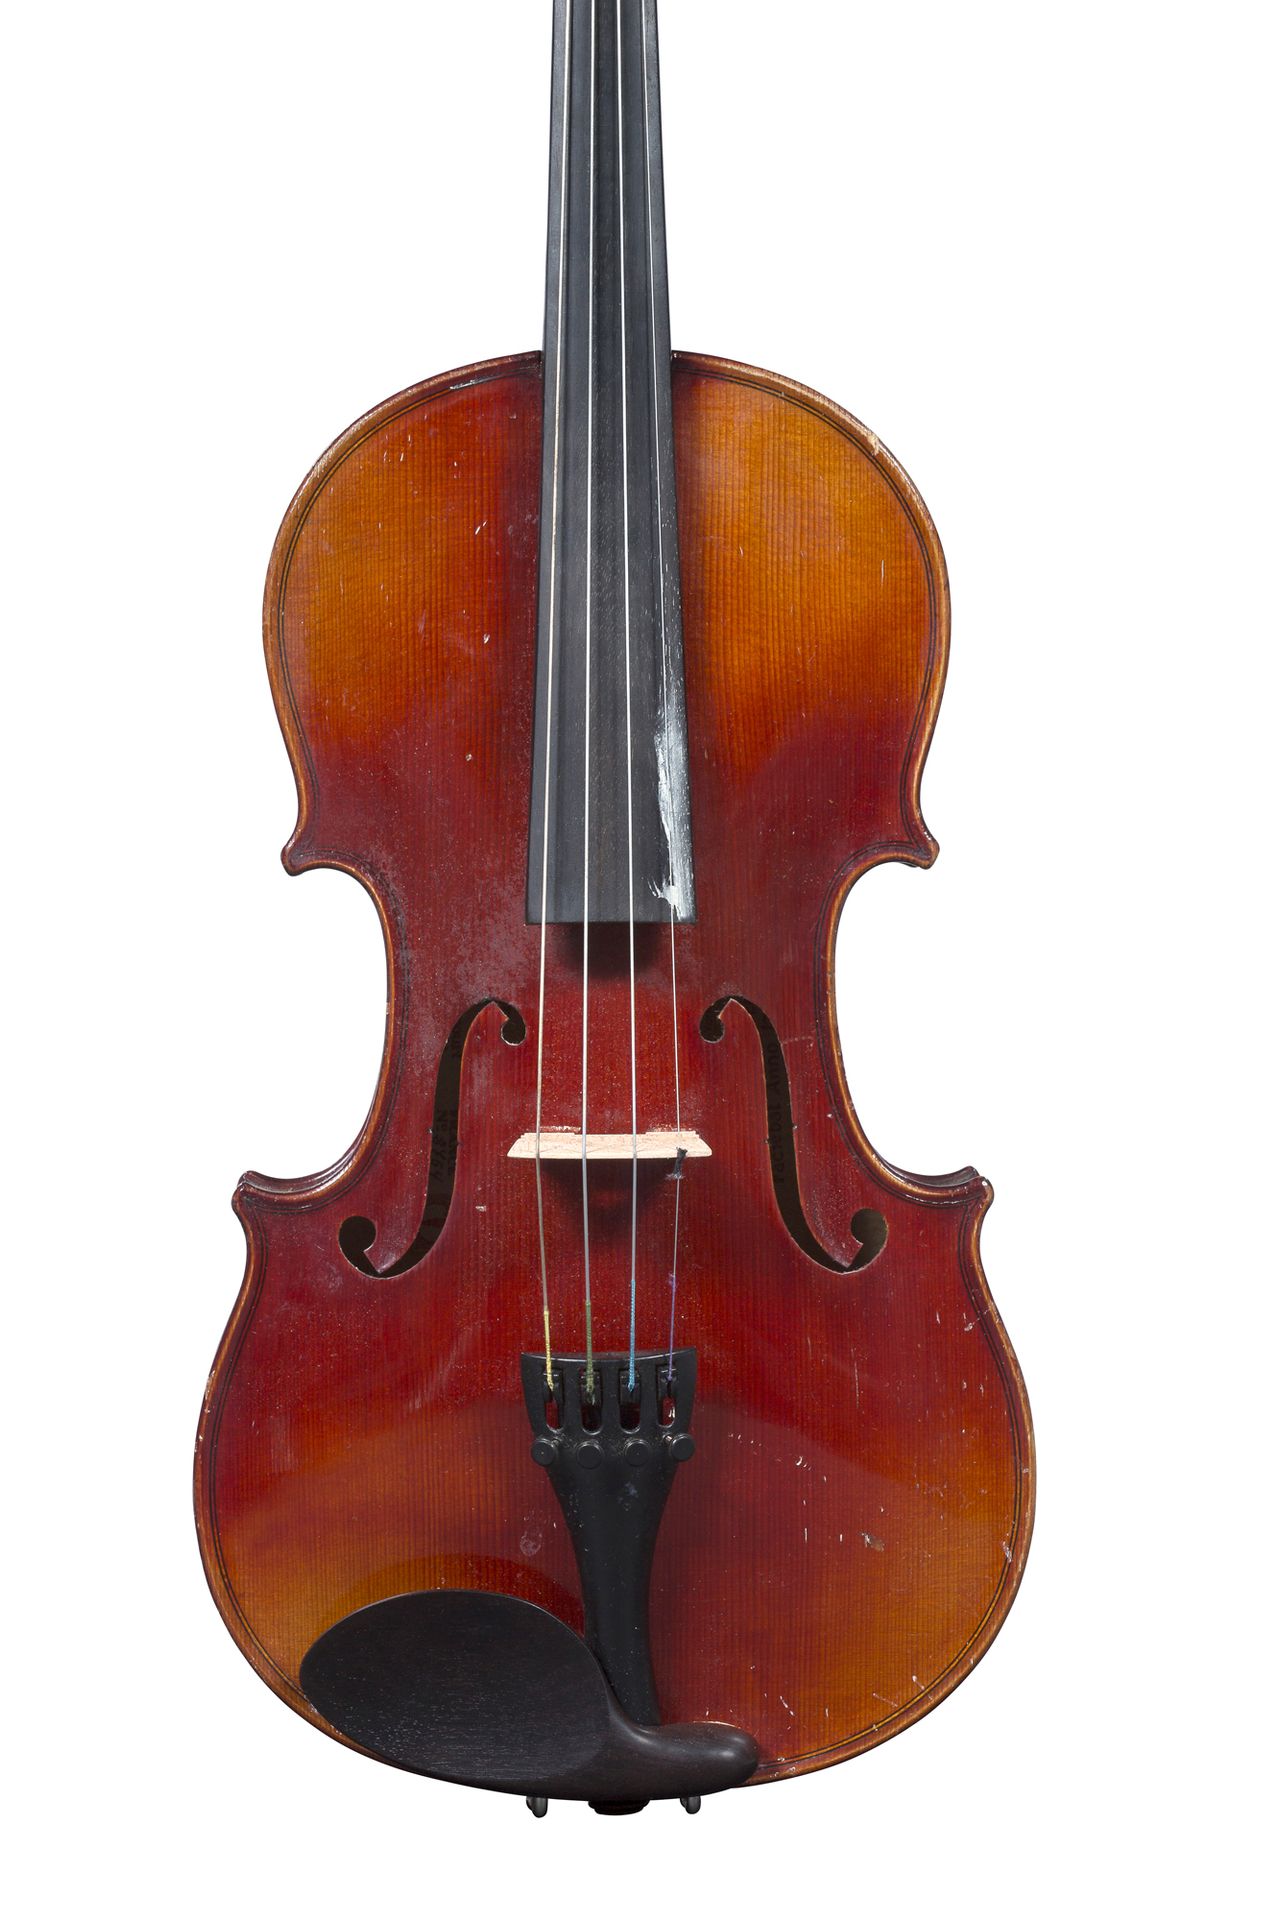 Null A French Violin
Under The Direction of Marc Laberte circa 1920-30